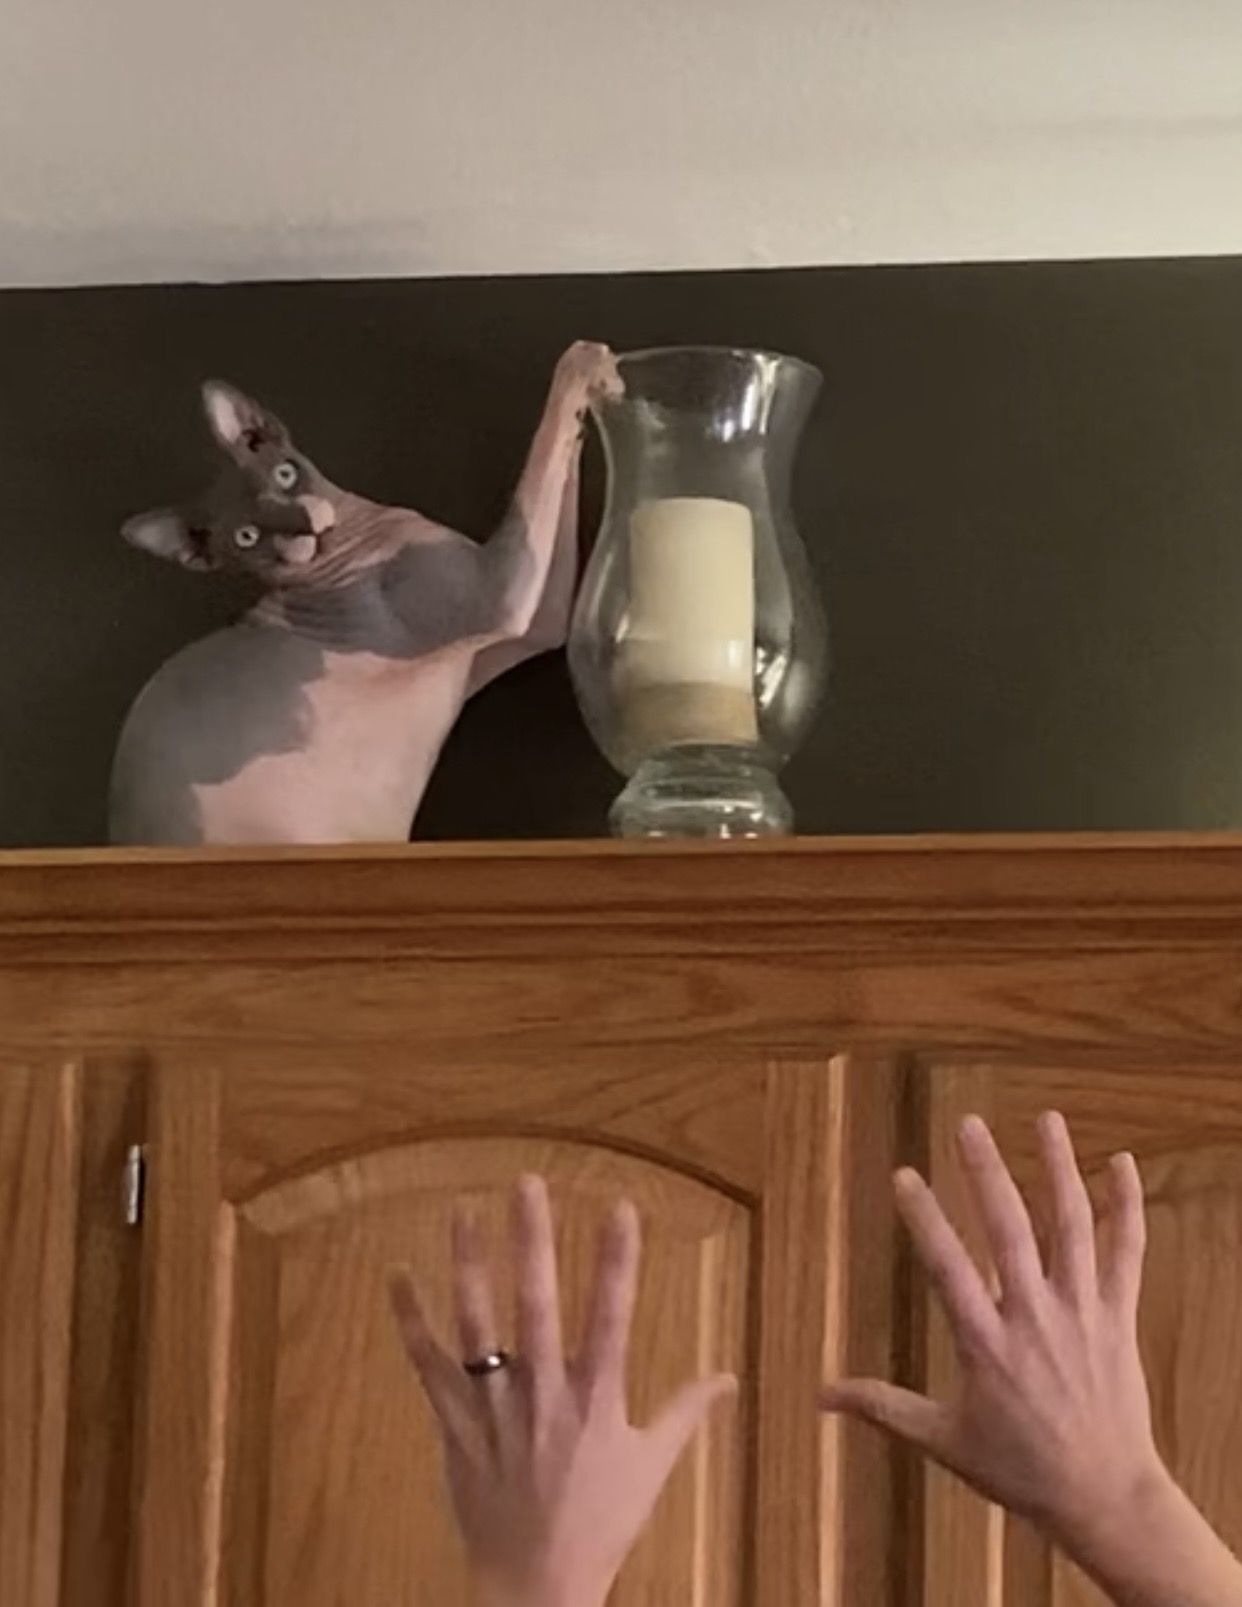 Our cat learned how to get on top of the cabinets..